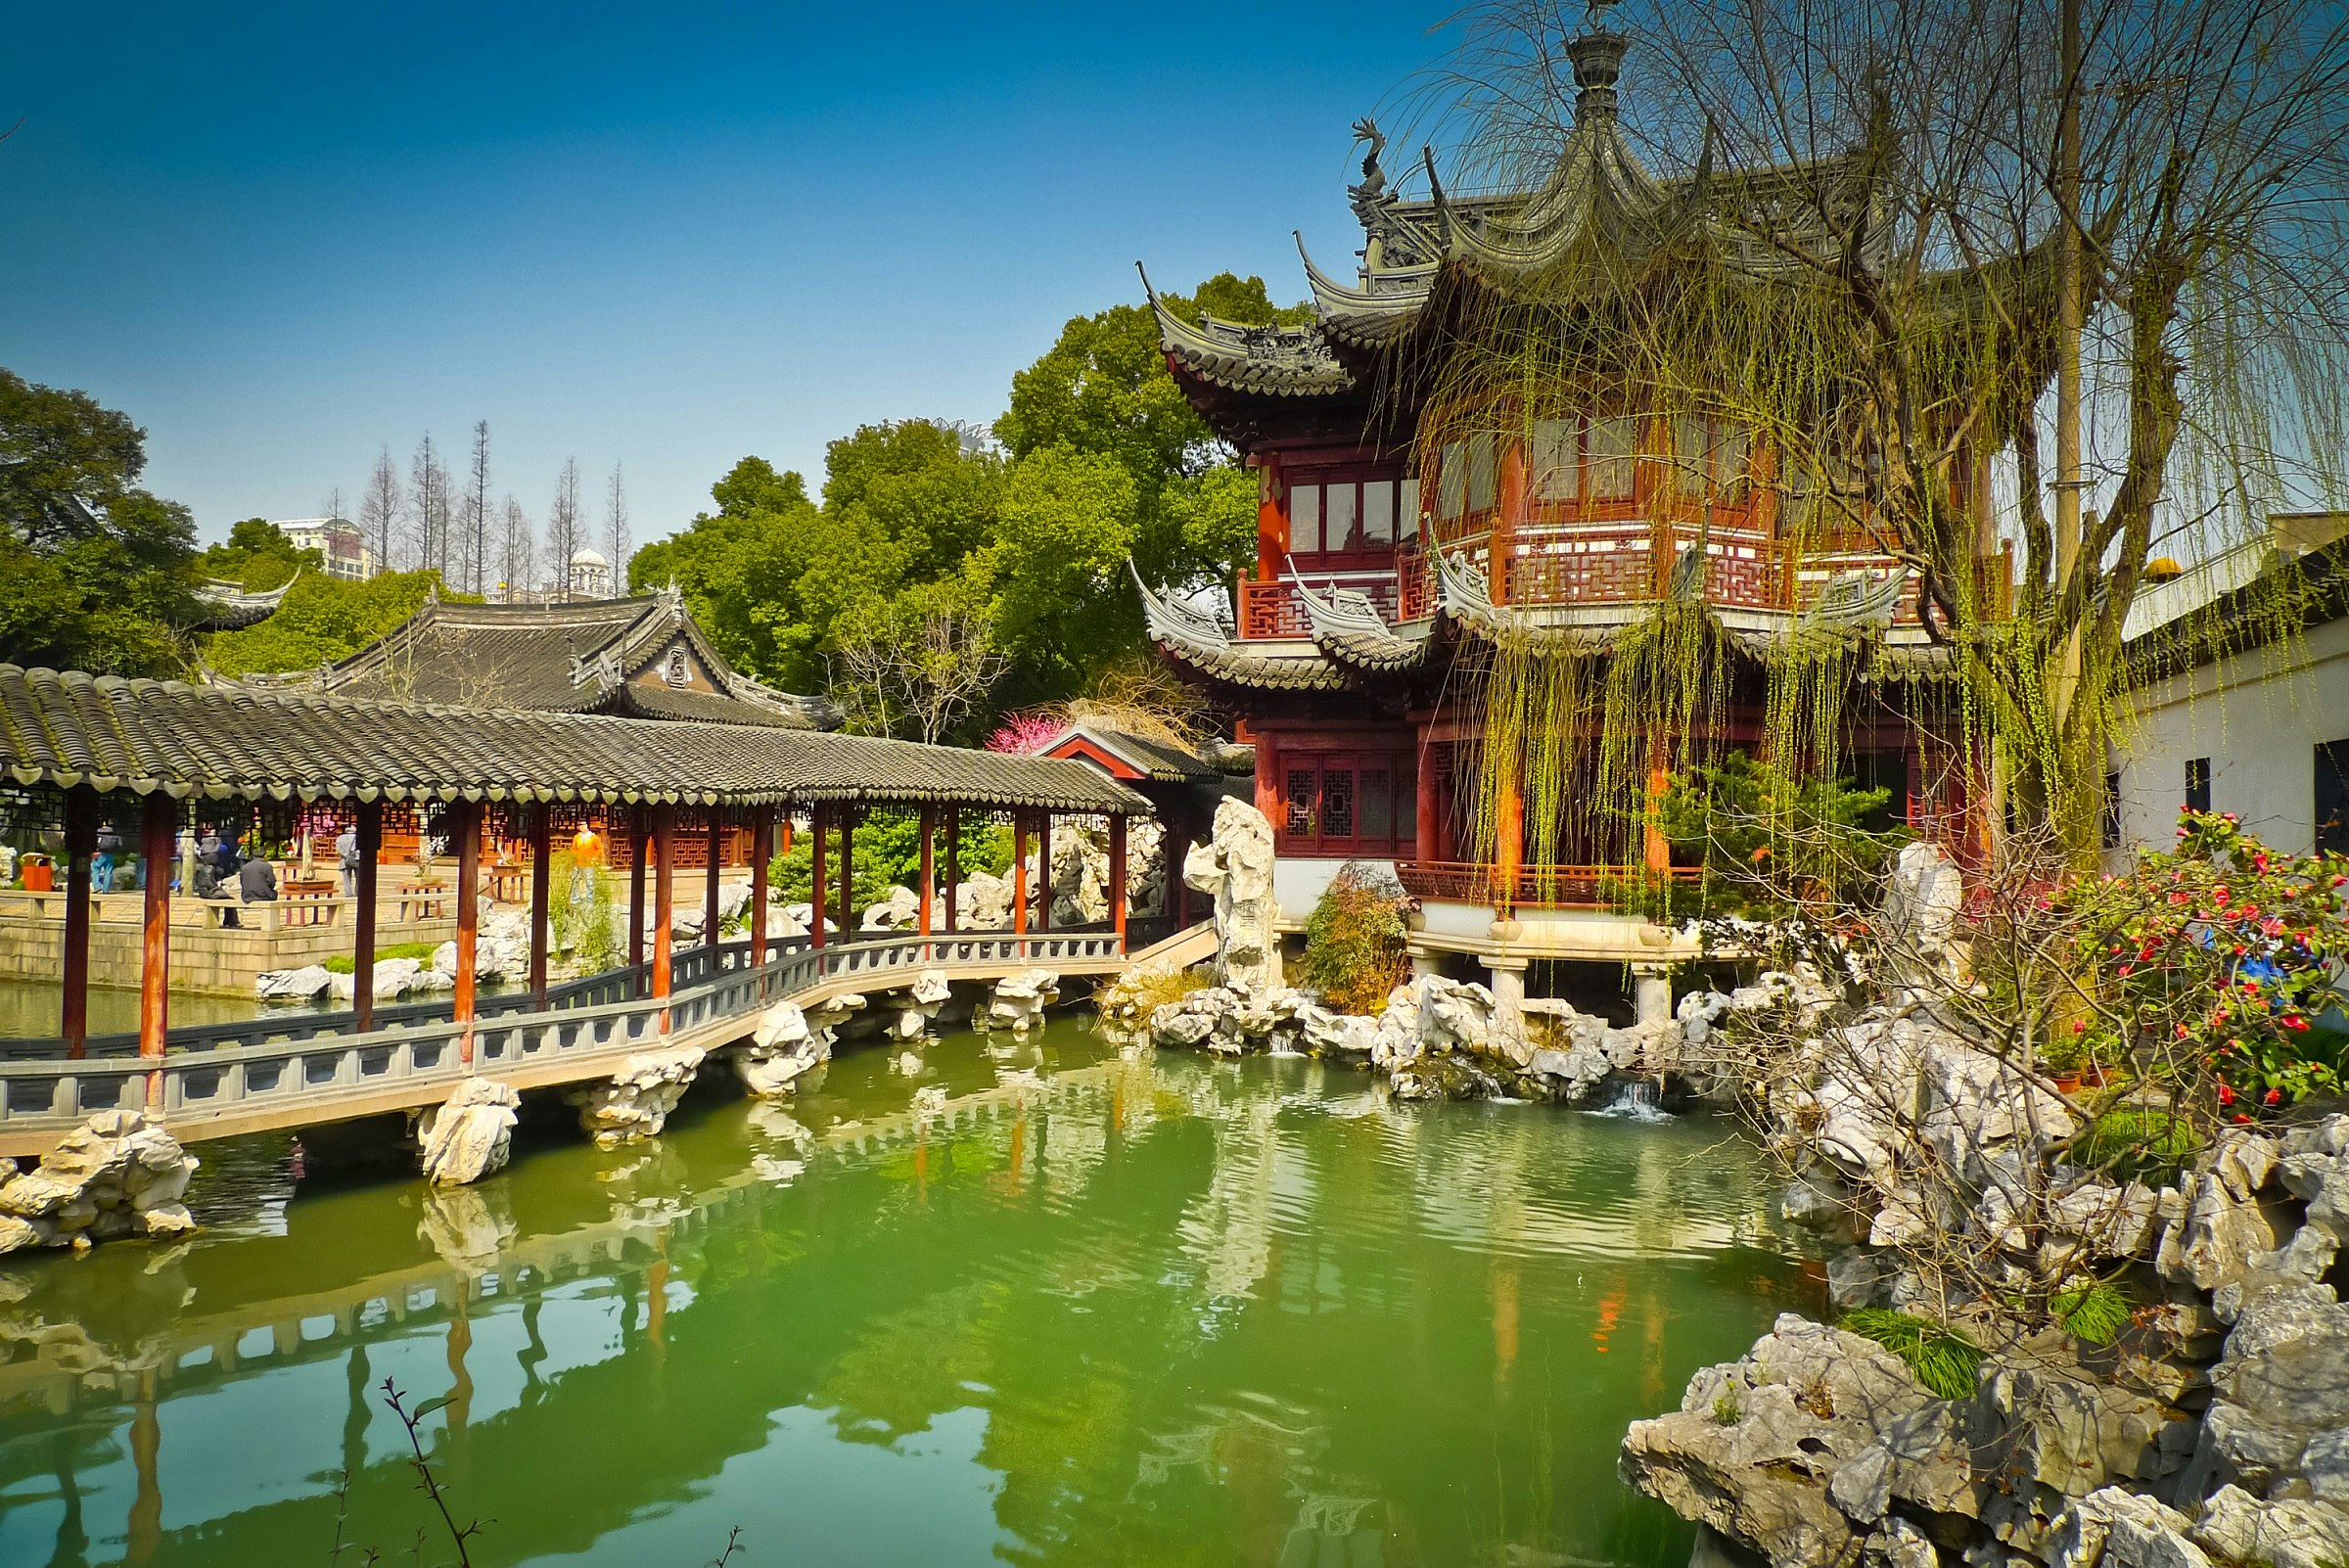 A traditionally styled bridge spans across a pond in Yuyuan Gardens in Shanghai. On the far edge of the pond stands a Chinese temple, surrounded by shrubbery.